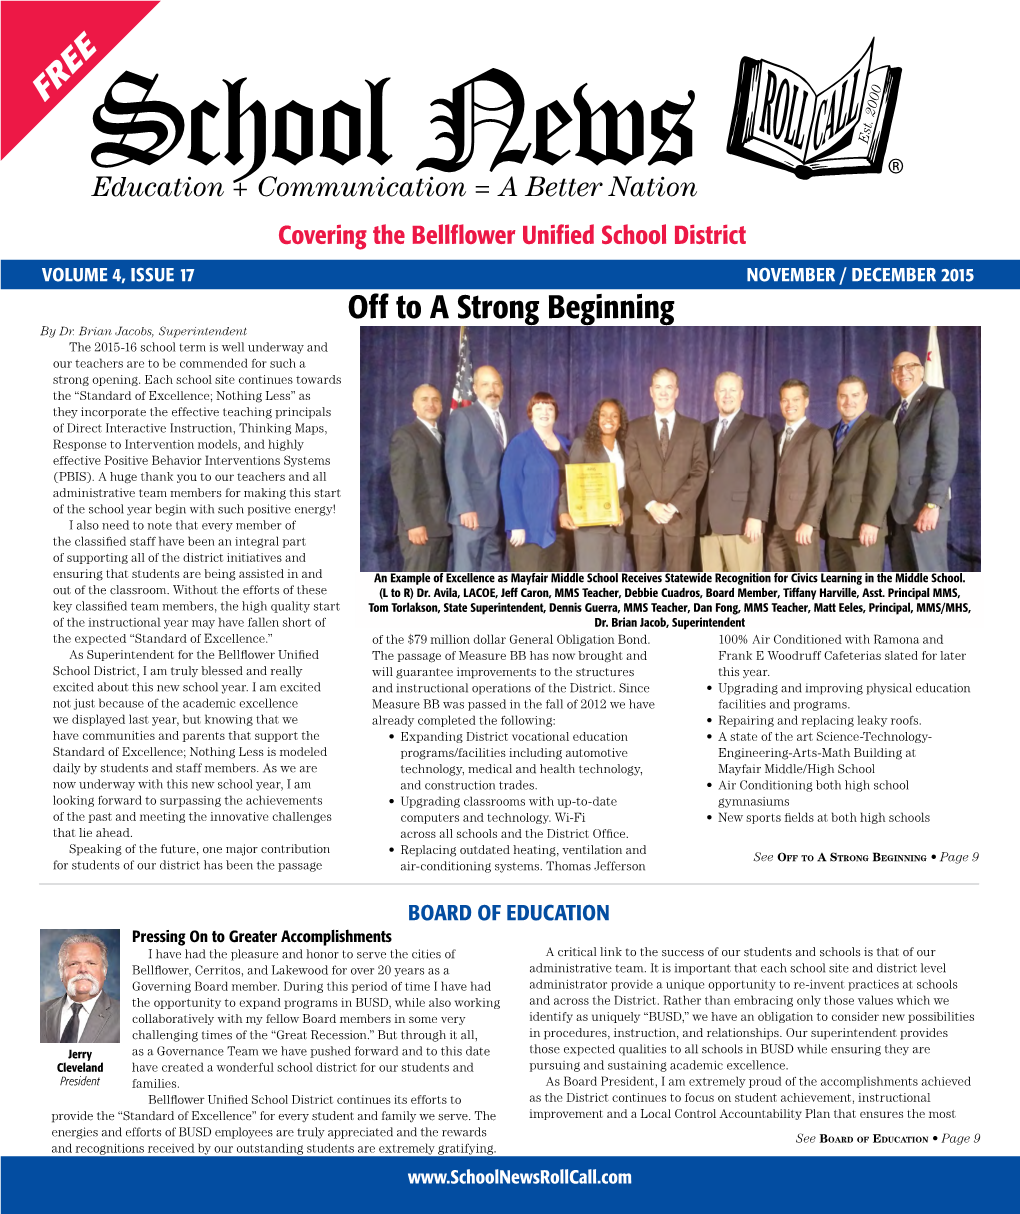 Covering the Bellflower Unified School District VOLUME 4, ISSUE 17 NOVEMBER / DECEMBER 2015 Off to a Strong Beginning by Dr